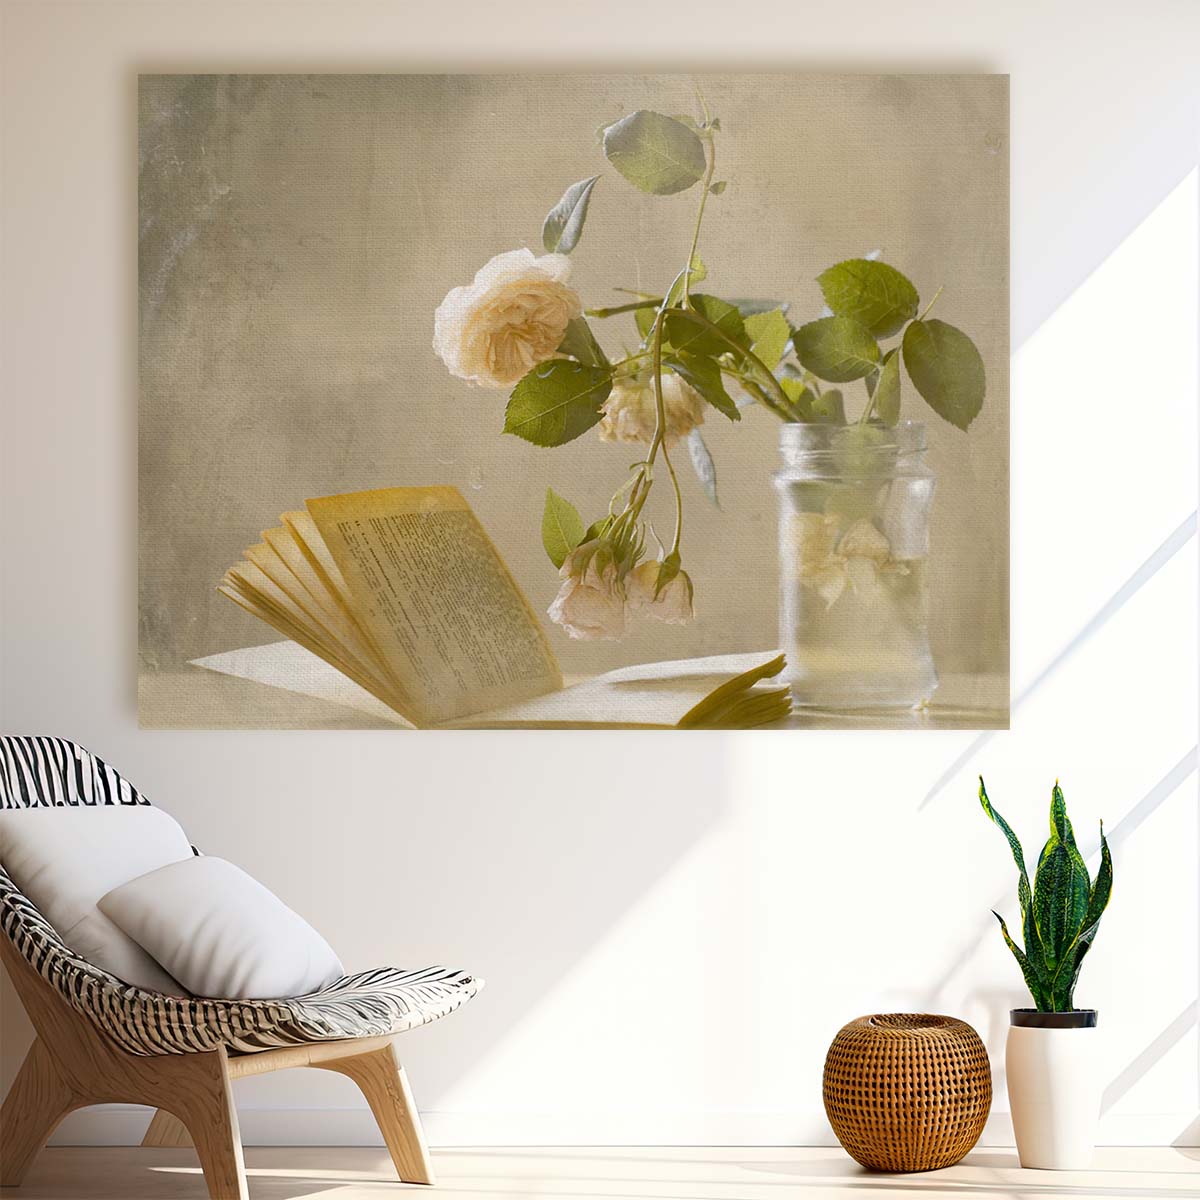 Vintage Floral & Book Still Life Wall Art by Luxuriance Designs. Made in USA.